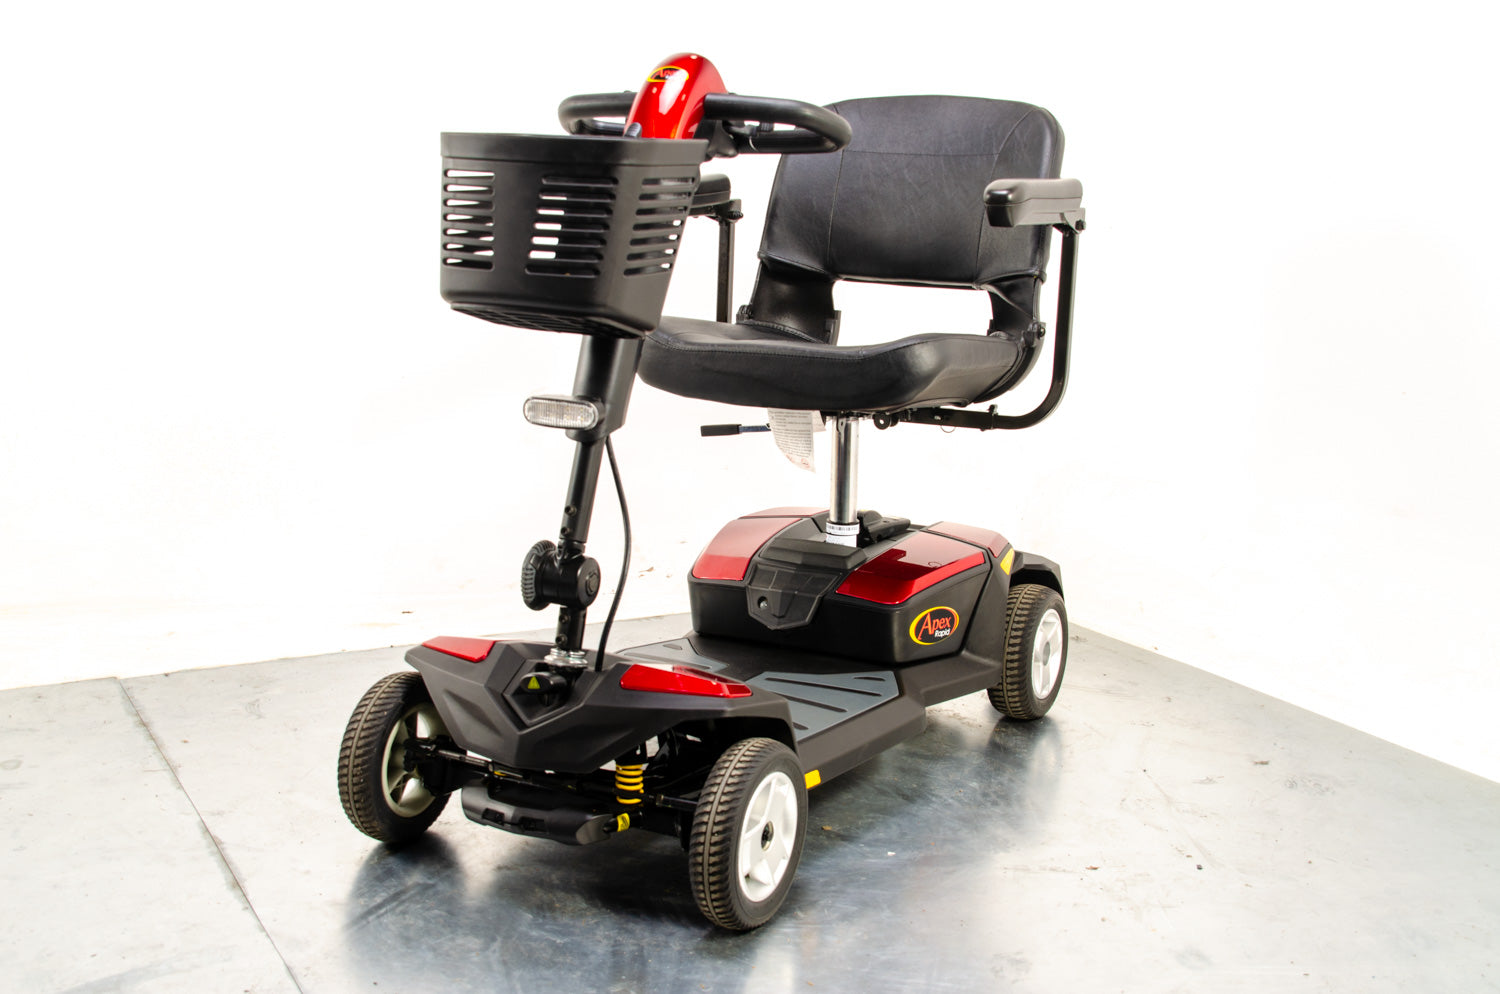 Pride Apex Rapid Used Mobility Scooter Transportable Small Lightweight Boot Suspension Red